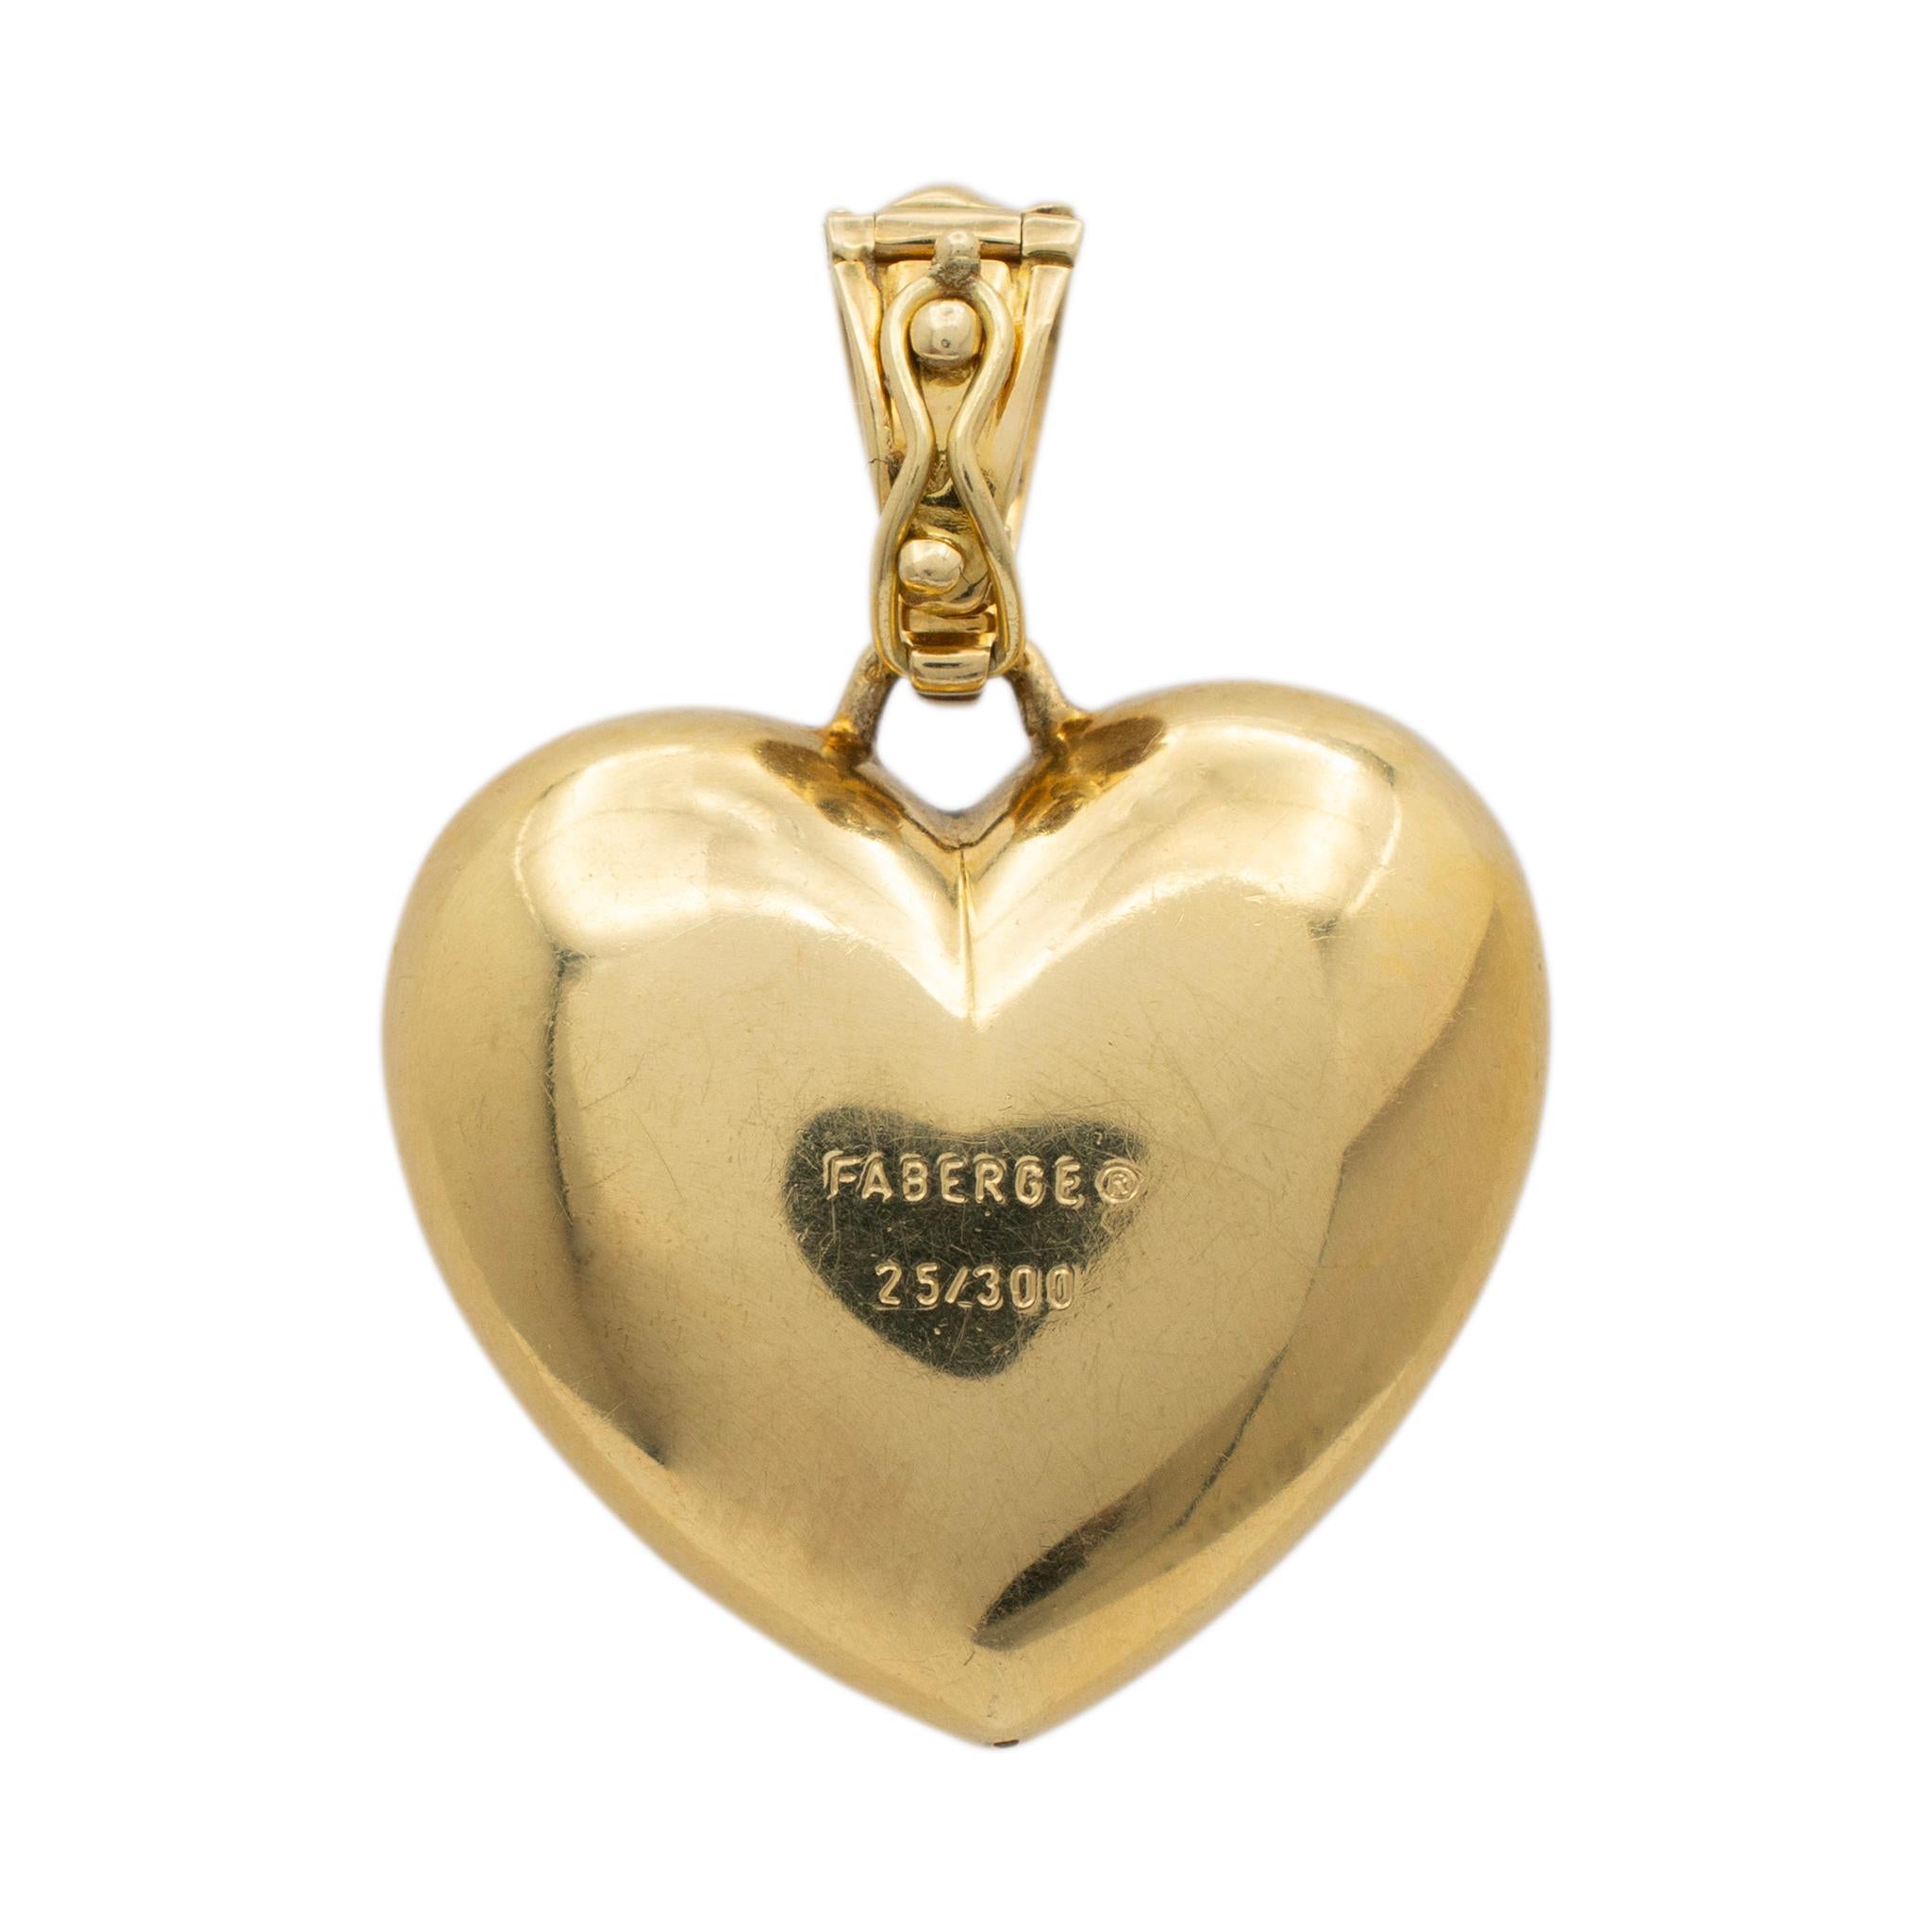 Brand: Faberge

Metal Type: 18K Yellow Gold

Thickness: 10.50 mm

Length: 1.25 Inches

Width: 1.00 mm

Weight: 12.50 Grams

18K yellow gold symbol diamond vintage heart-shaped pendant. The metal was tested and determined to be 18K yellow gold.